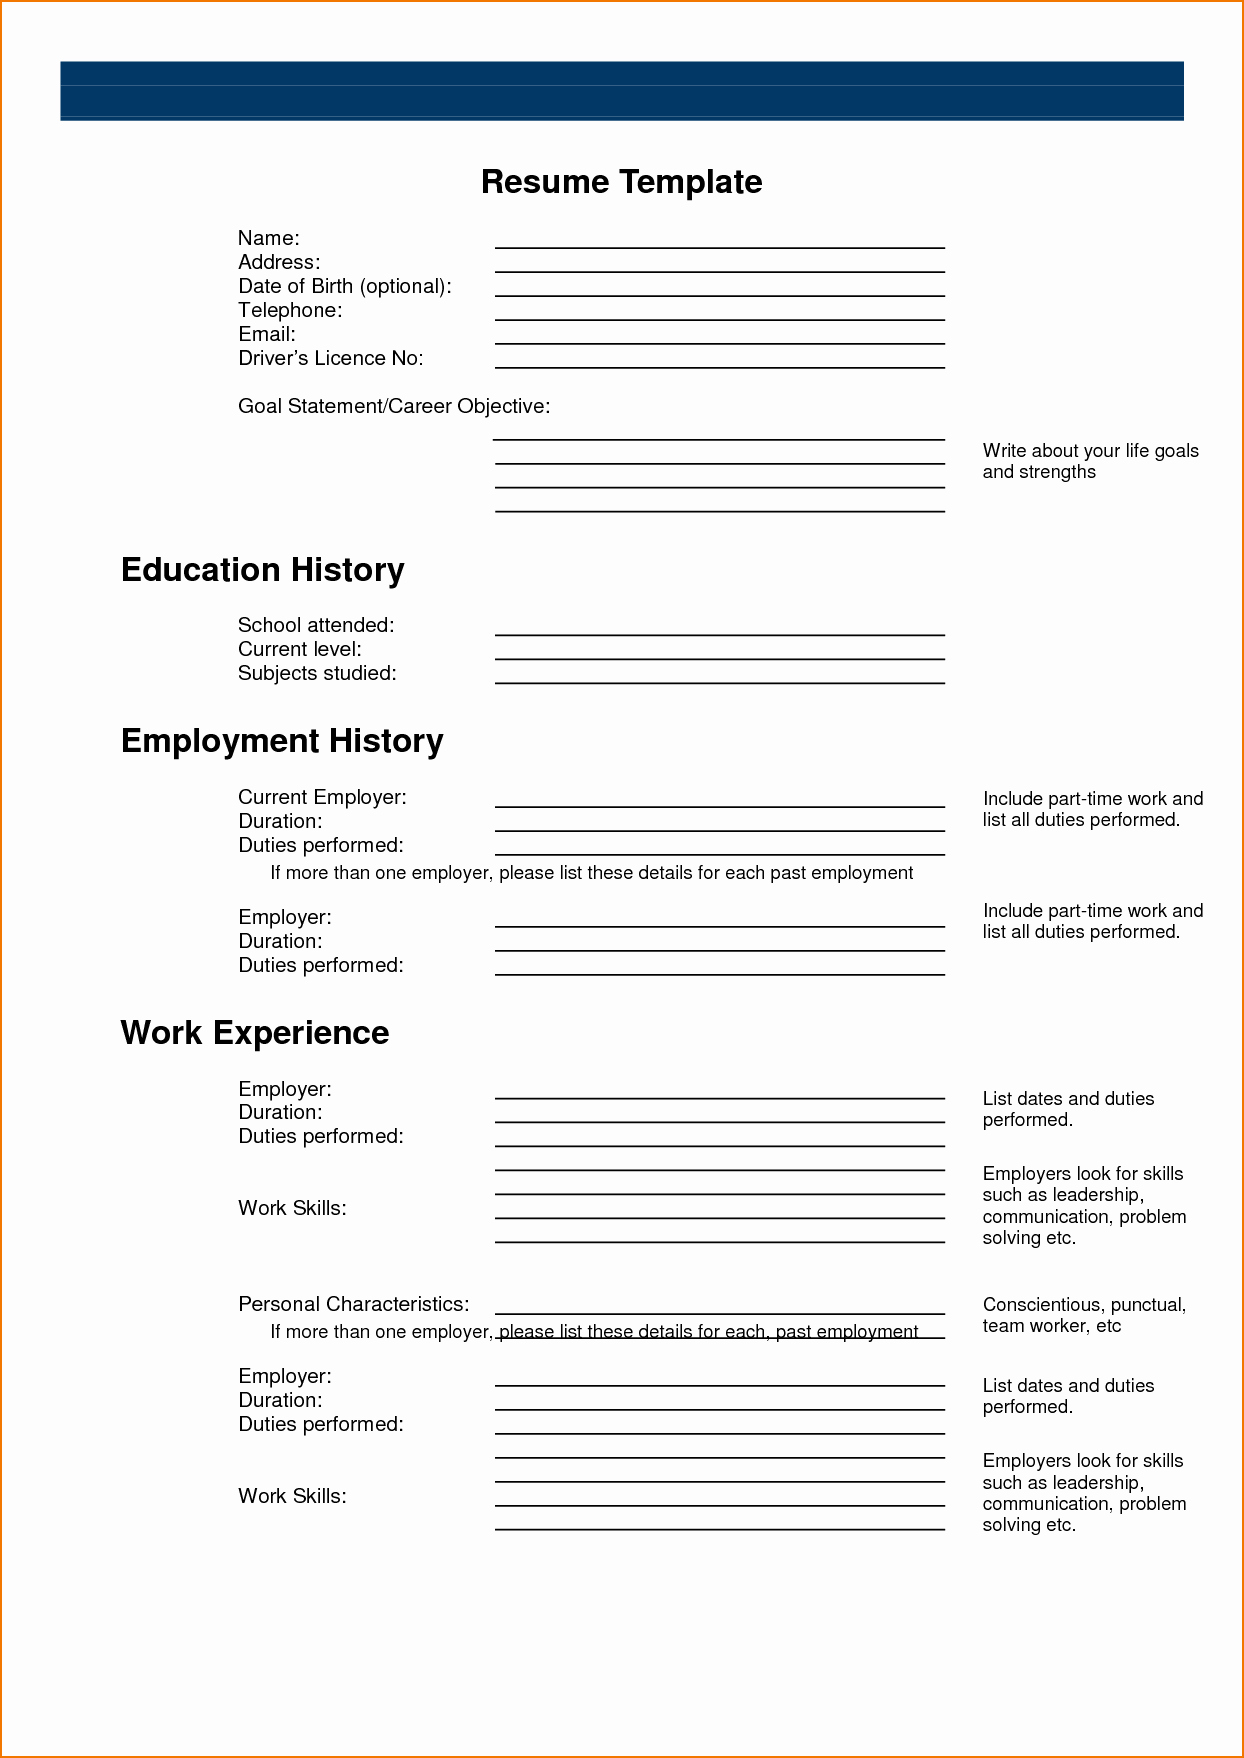 Free Resume Builder and Download